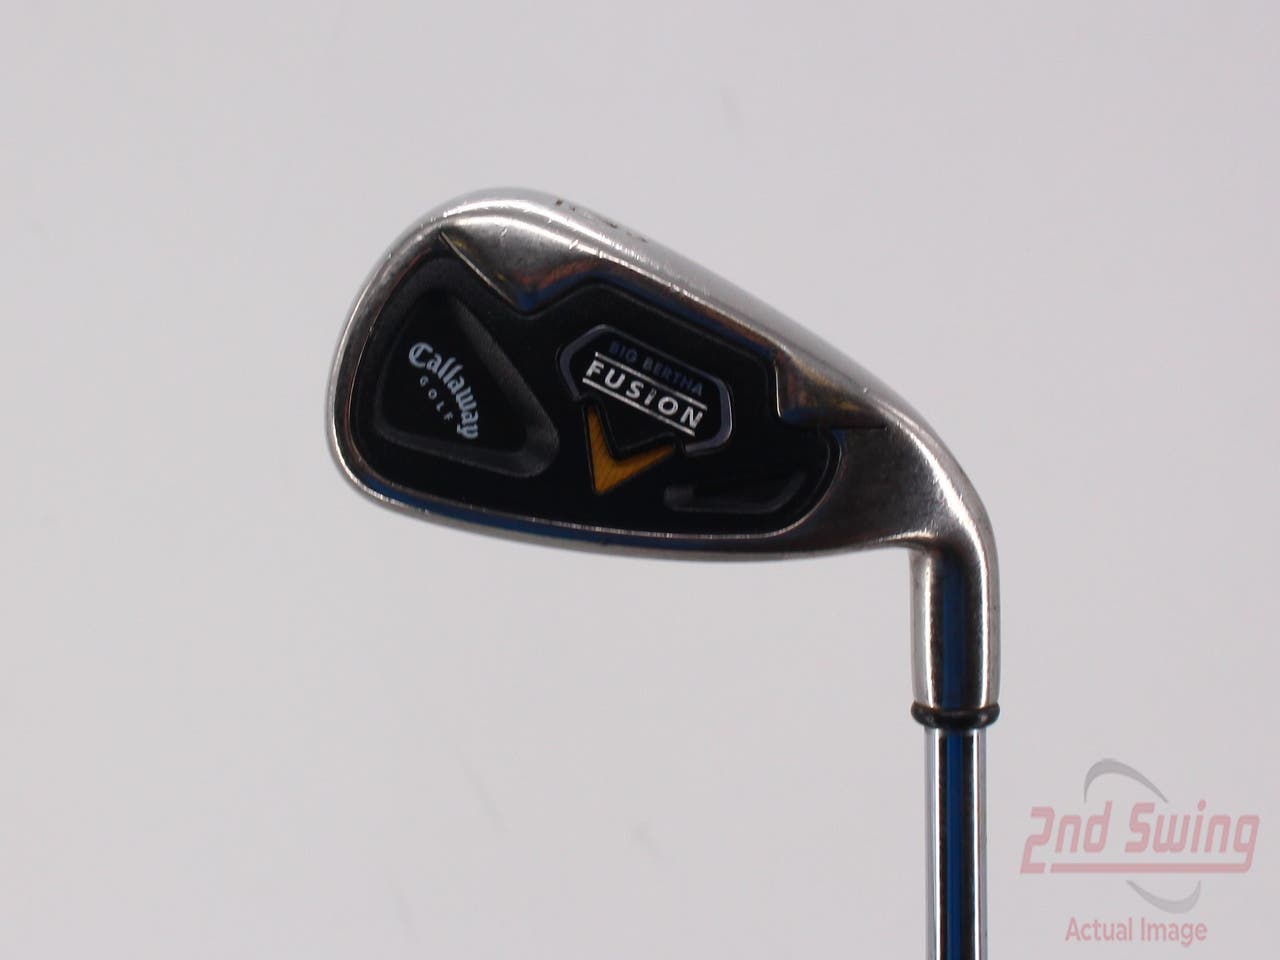 Callaway Fusion Single Iron 6 Iron Nippon NS Pro 990GH Steel Uniflex Right Handed 37.75in